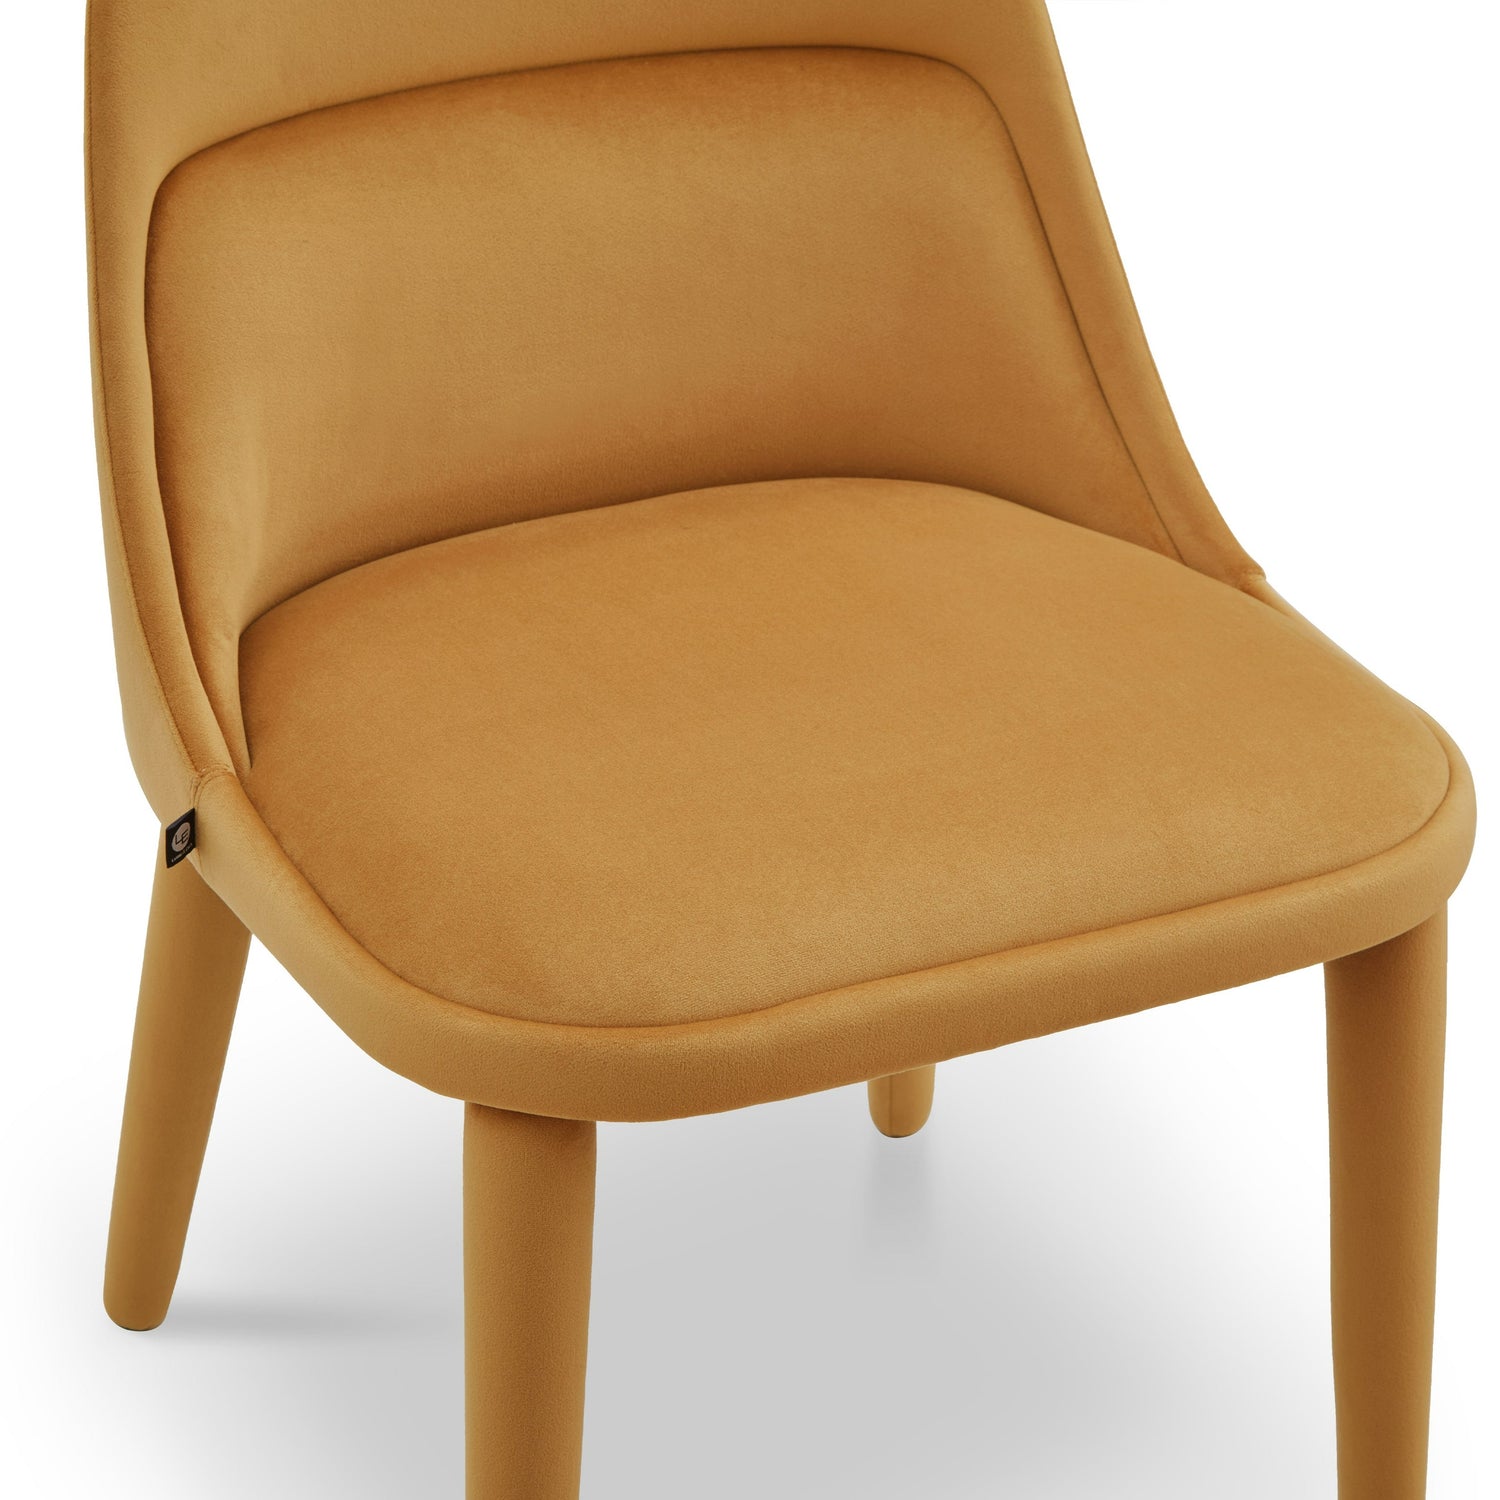  LiangAndEimil-Liang & Eimil Diva Dining Chair in Kaster II Mustard-Yellow 501 